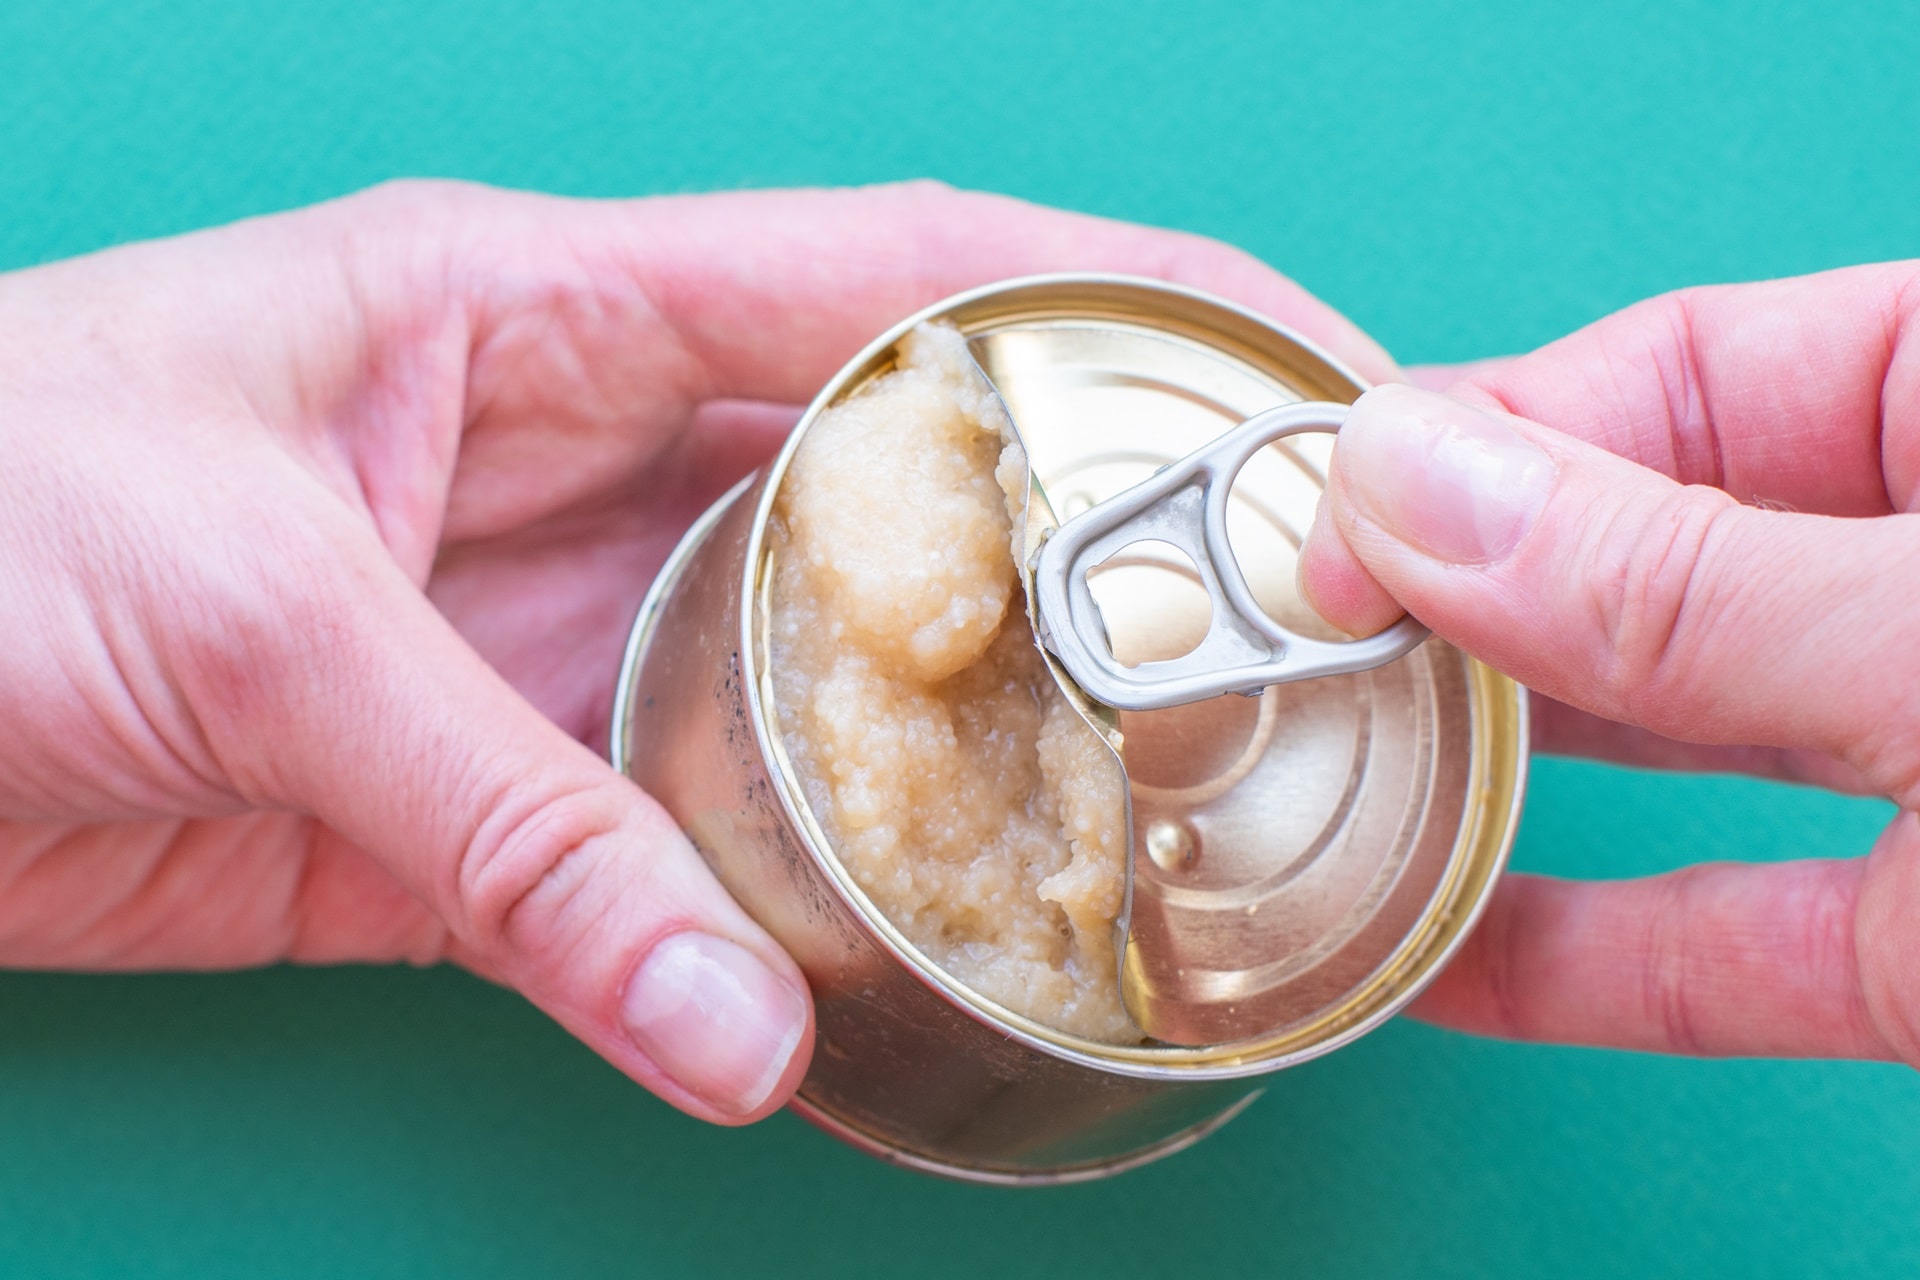 How do you know if you have canned food poisoning? What to look for in canned foods? 